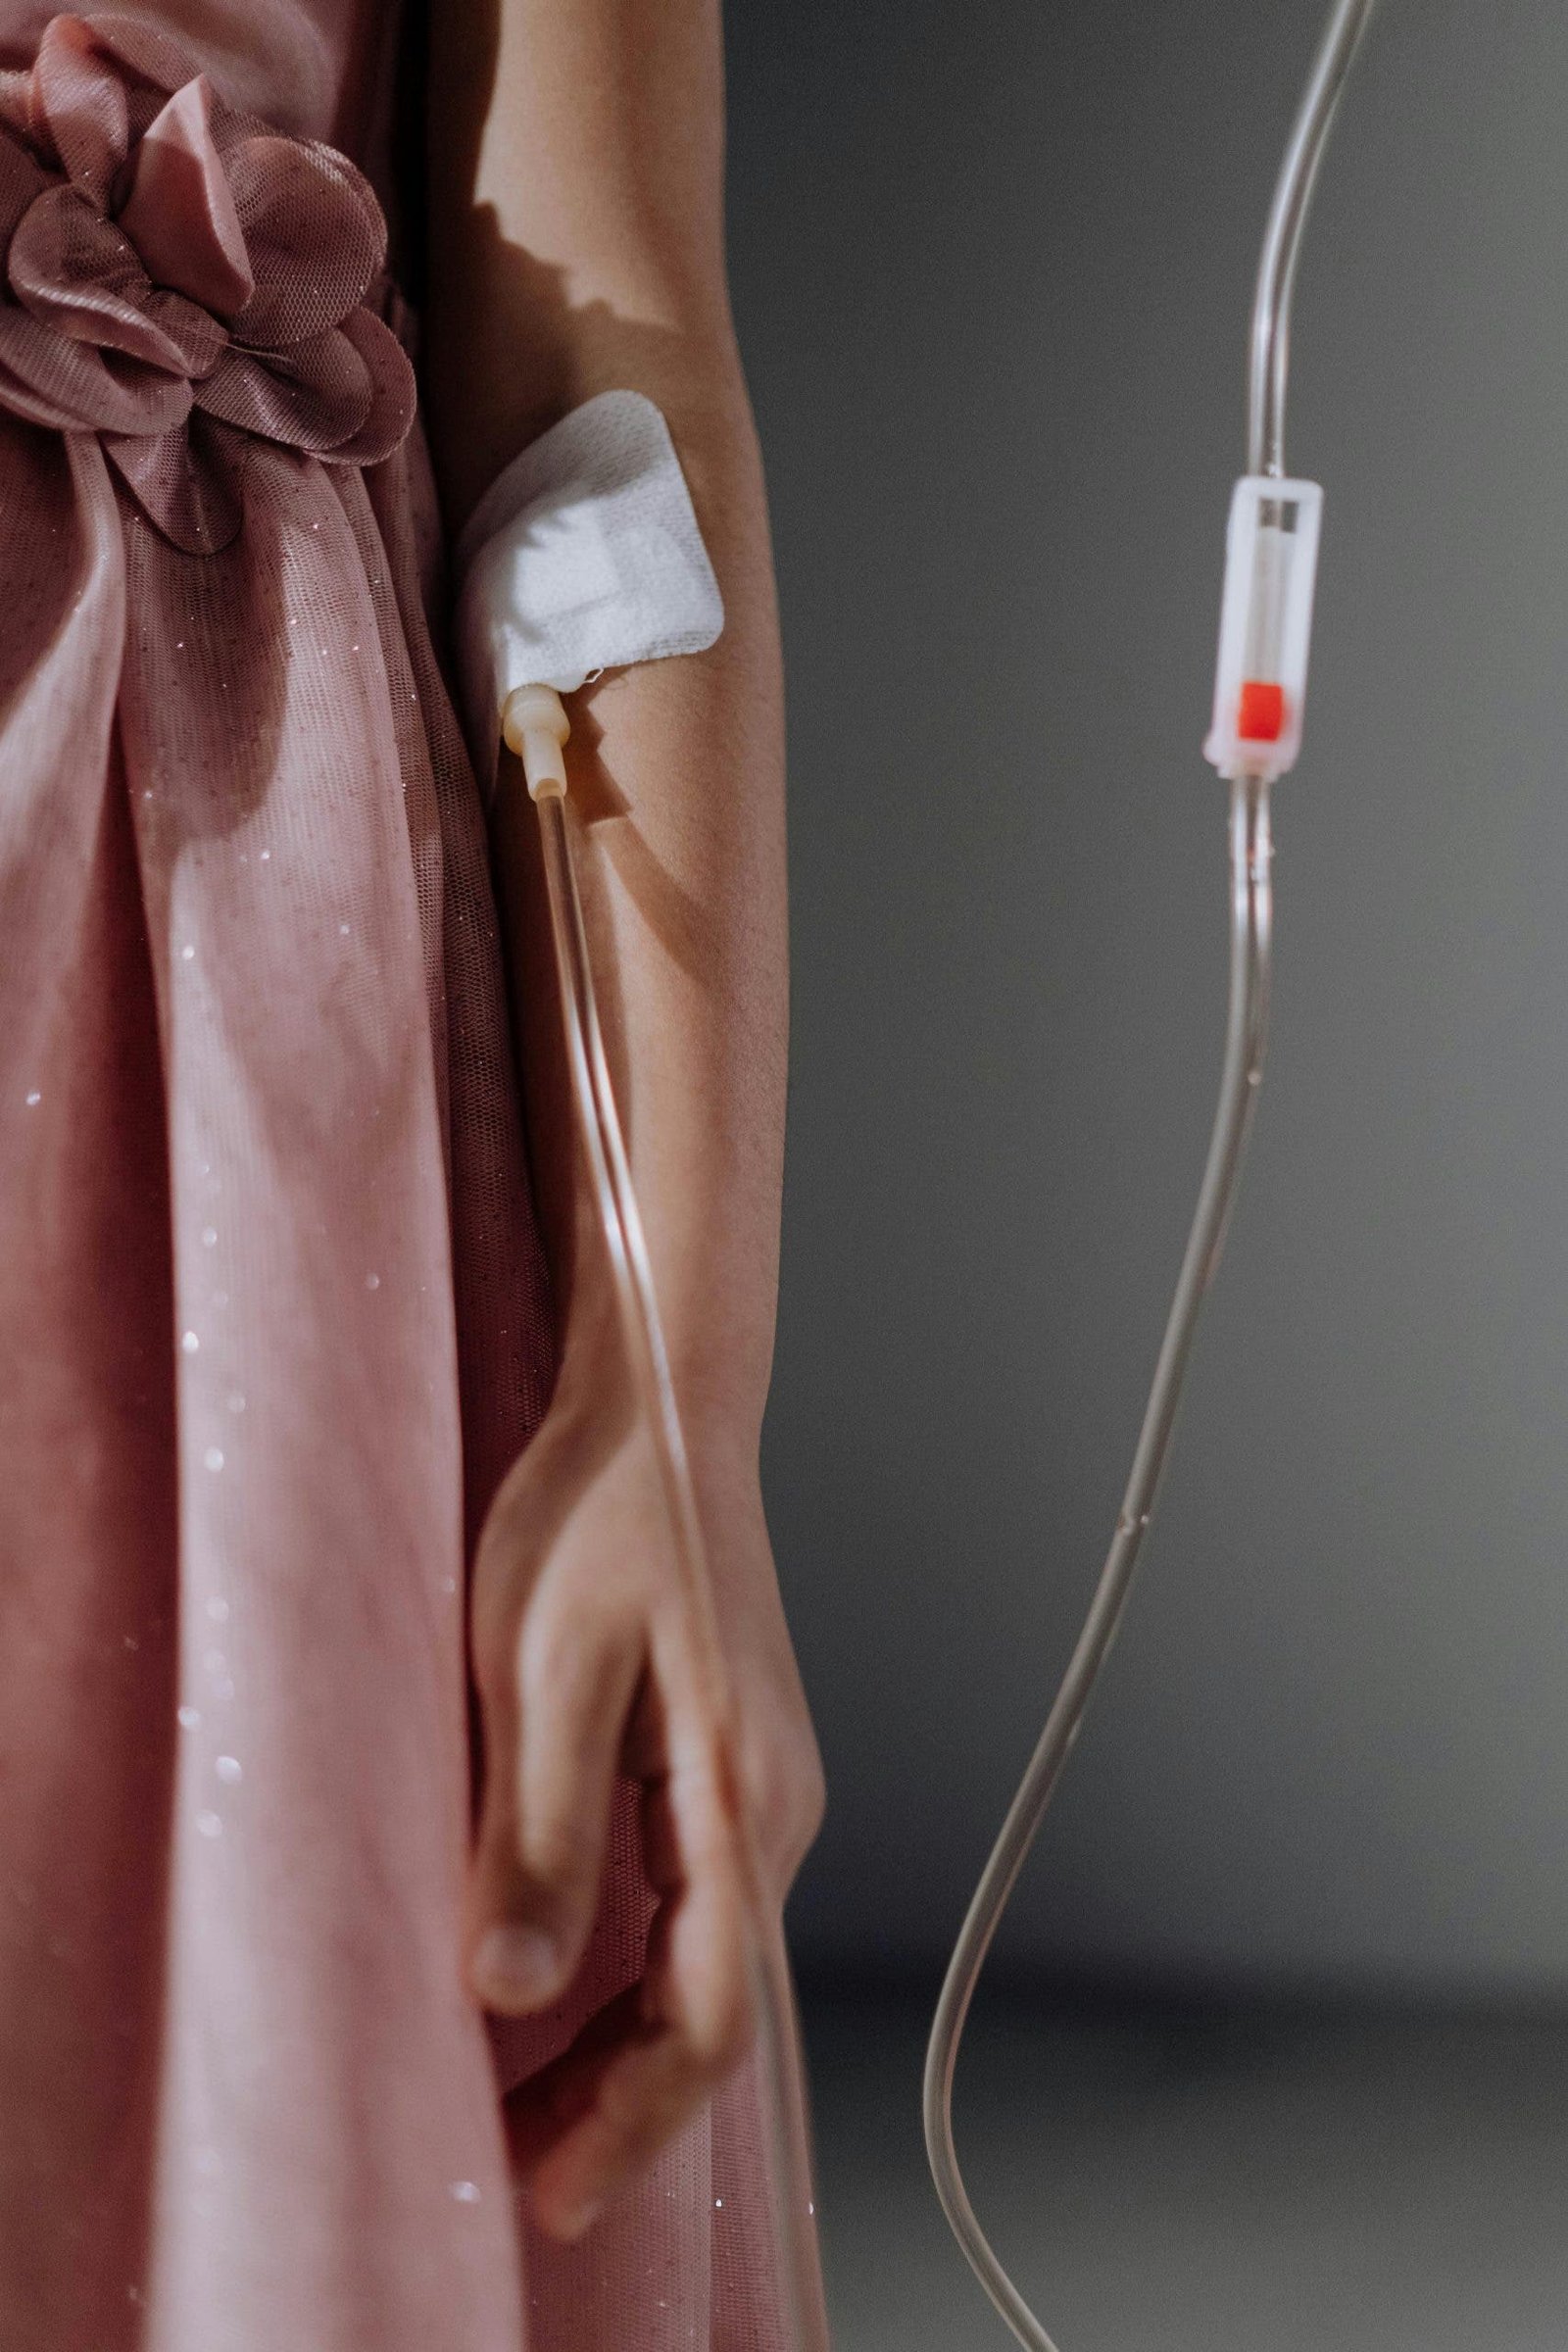 Exploring the Pros and Cons of Glutathione IV Drip Therapy